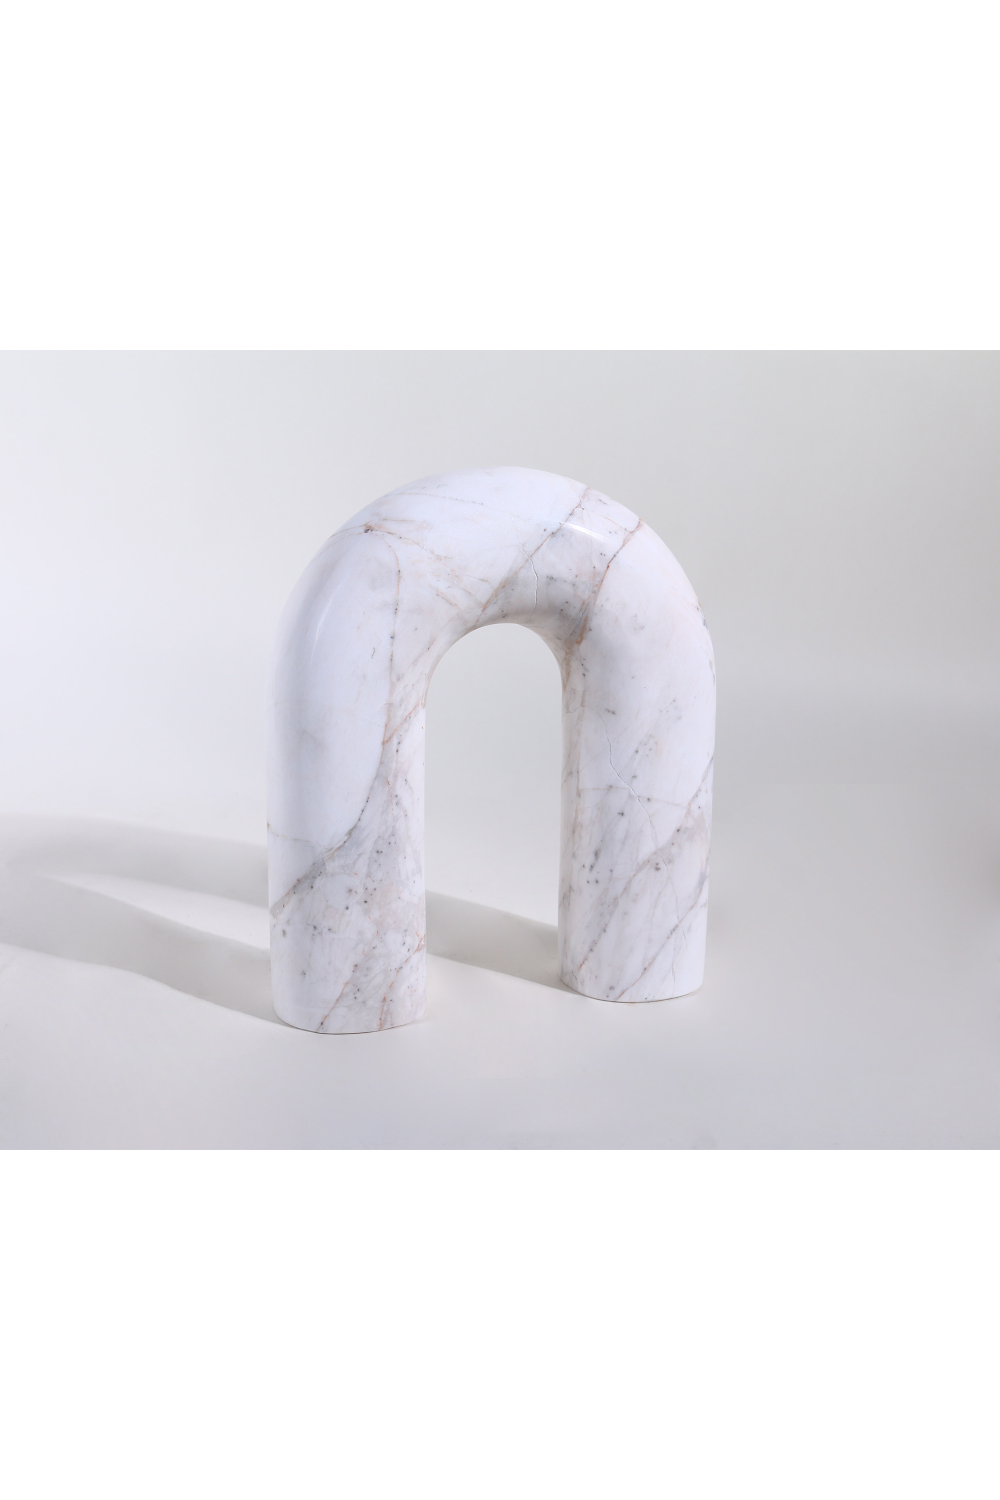 White Marble Curved Sculpture | Liang & Eimil Arc | Oroa.com